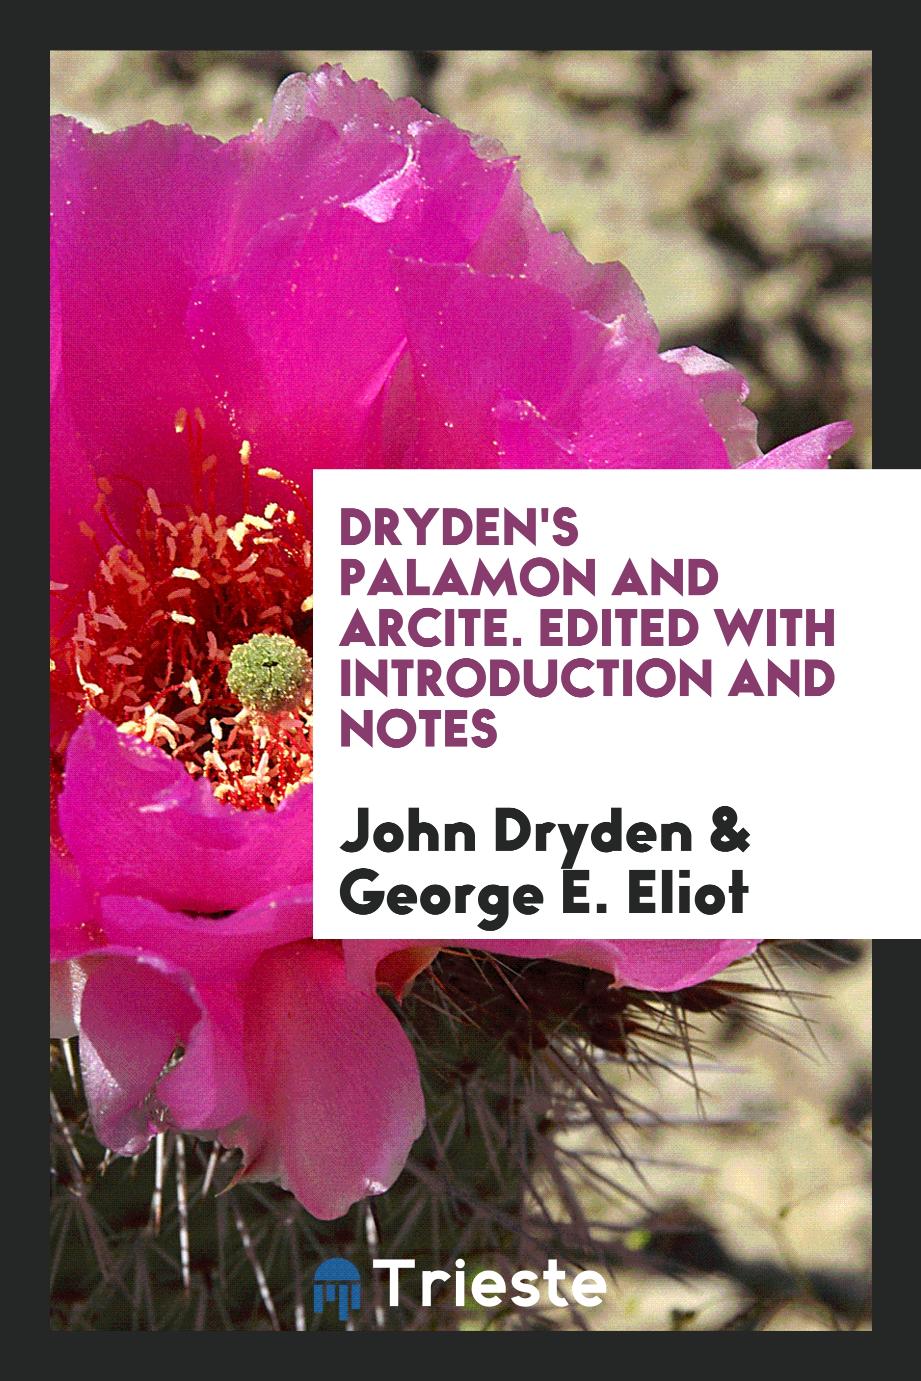 Dryden's Palamon and Arcite. Edited with Introduction and Notes